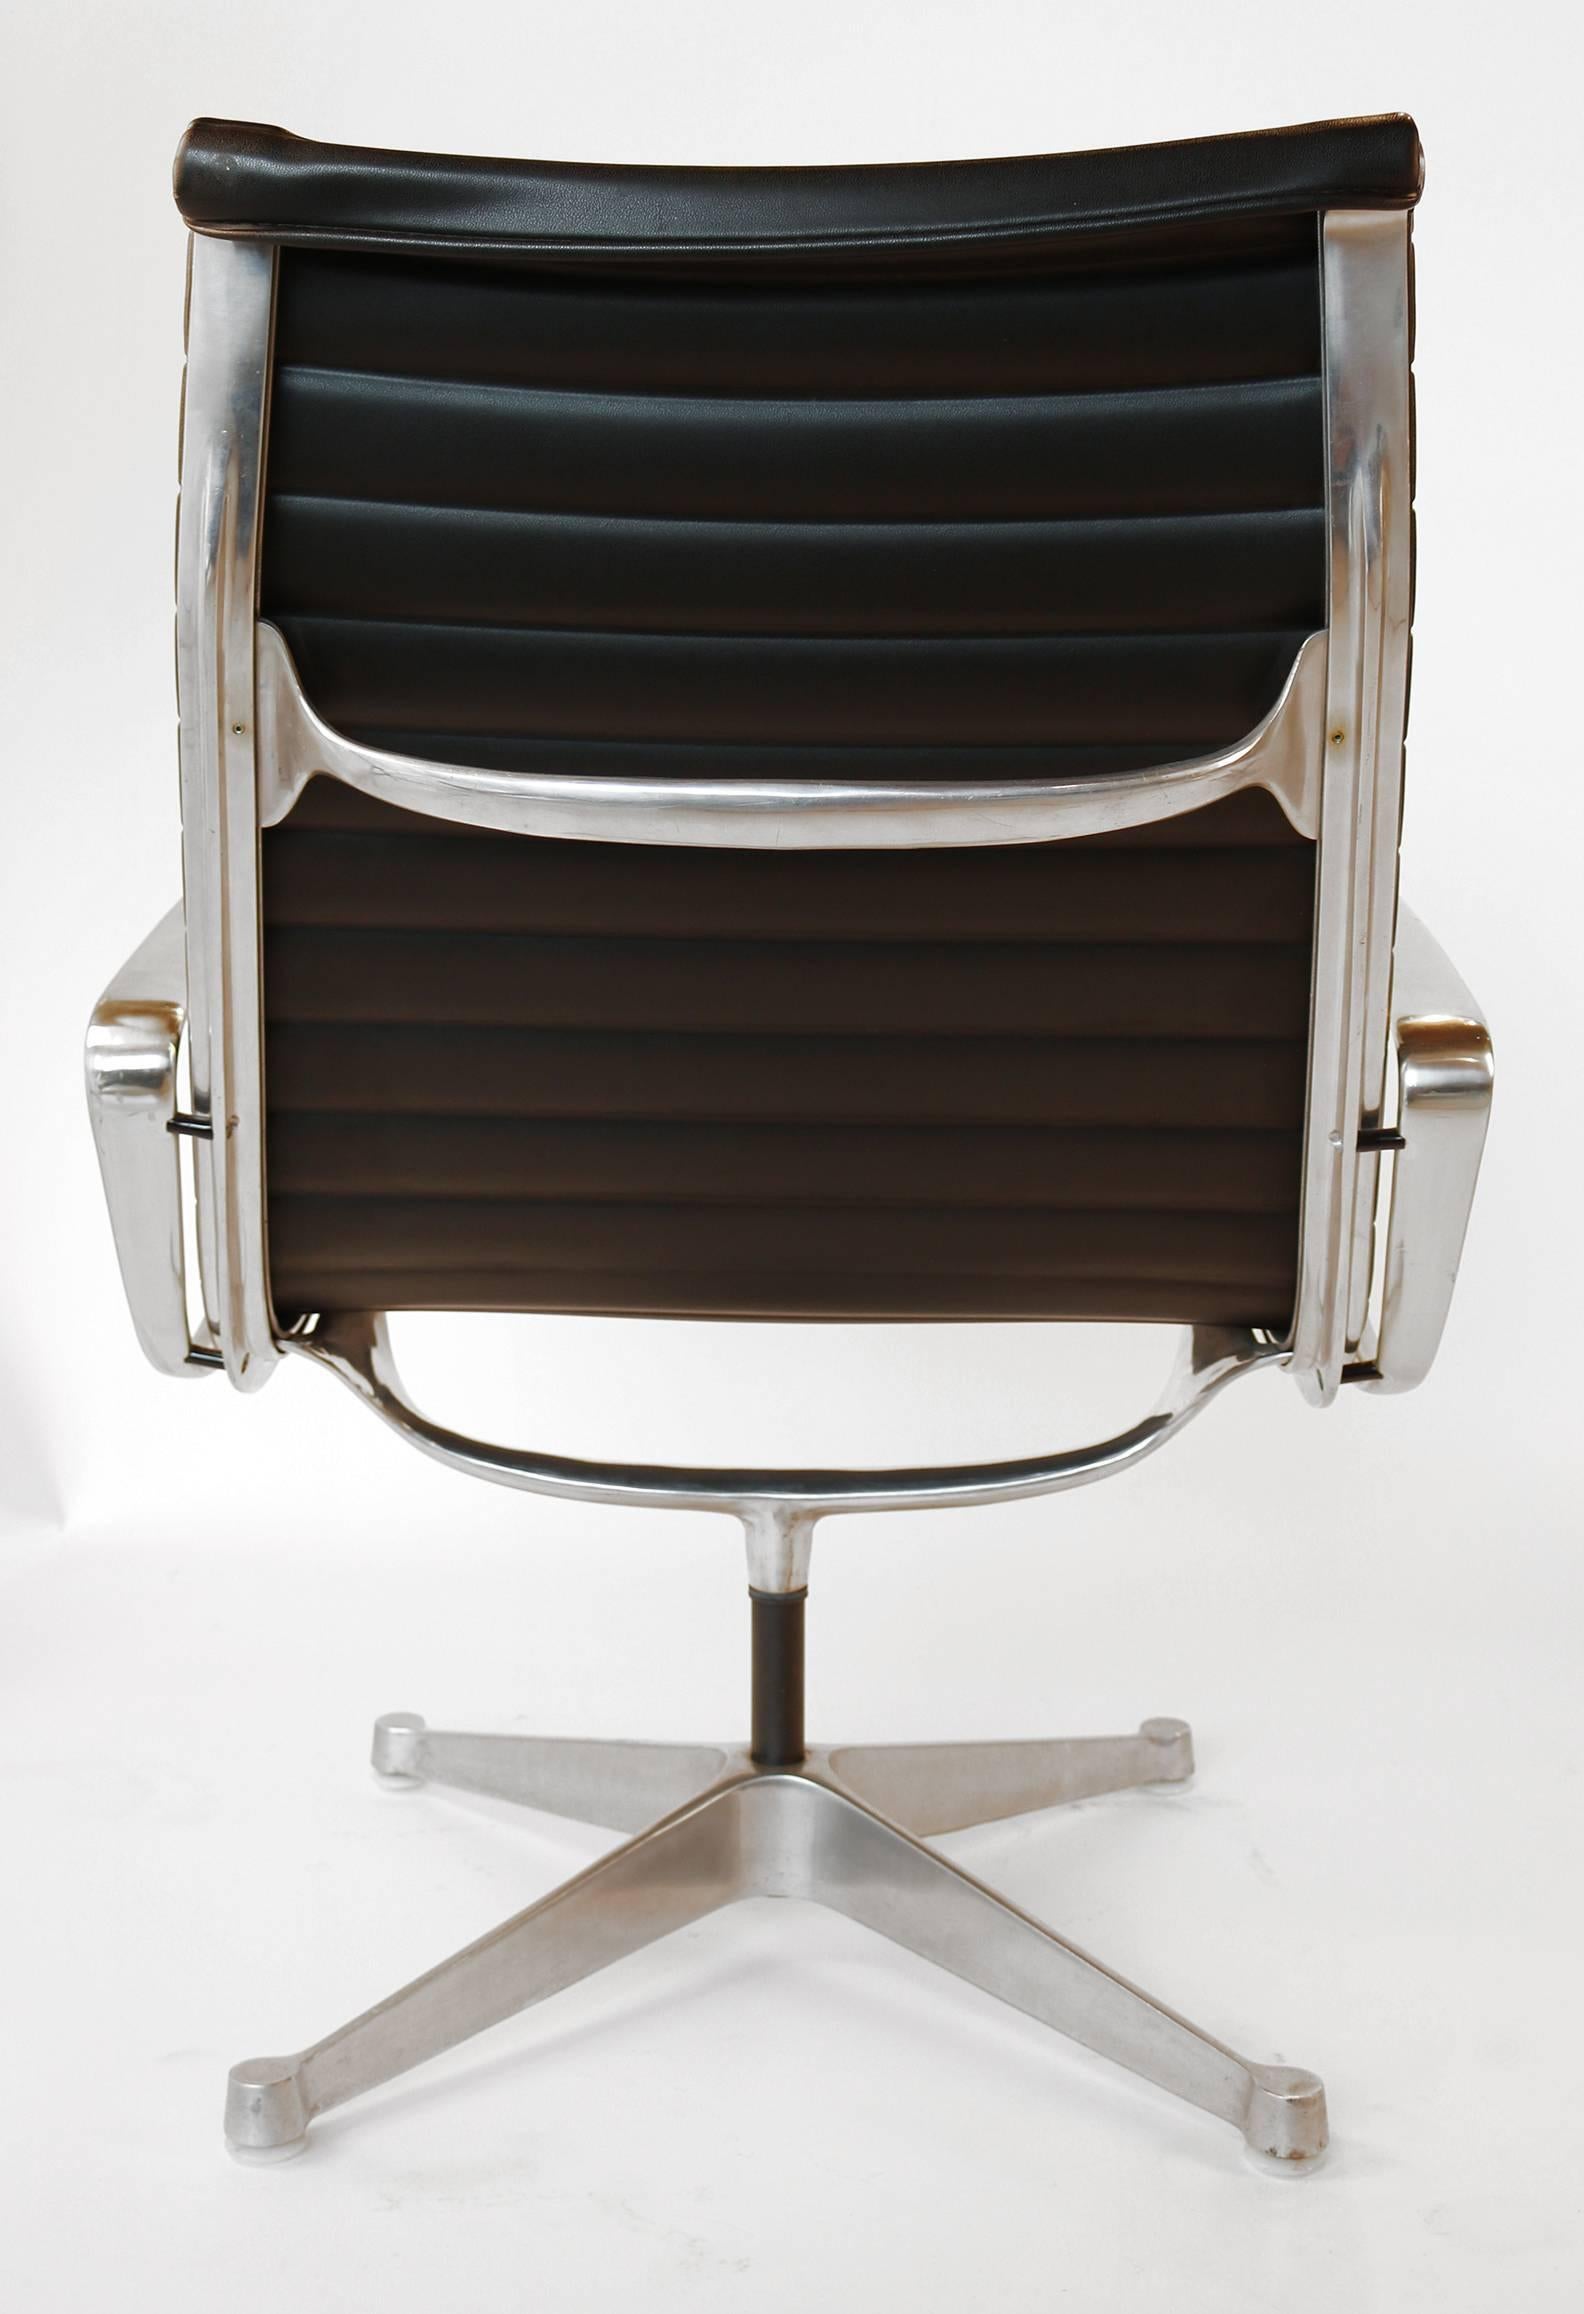 American Charles Eames for Herman Miller Aluminium Group Swivel Lounge Chairs